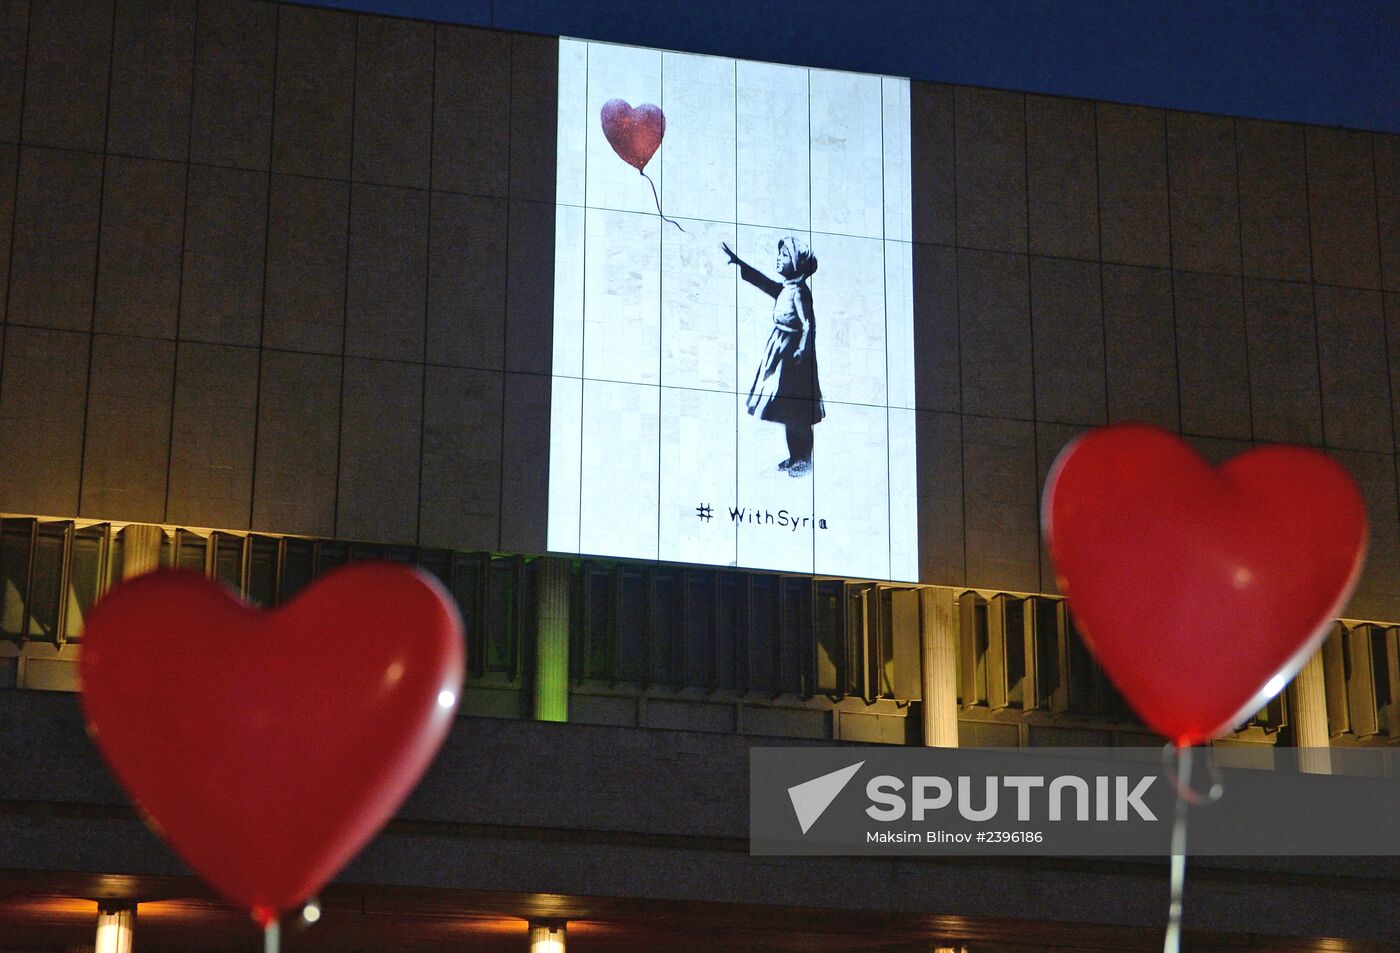 Installation of works by Banksy on a wall in the State Tretyakov Gallery